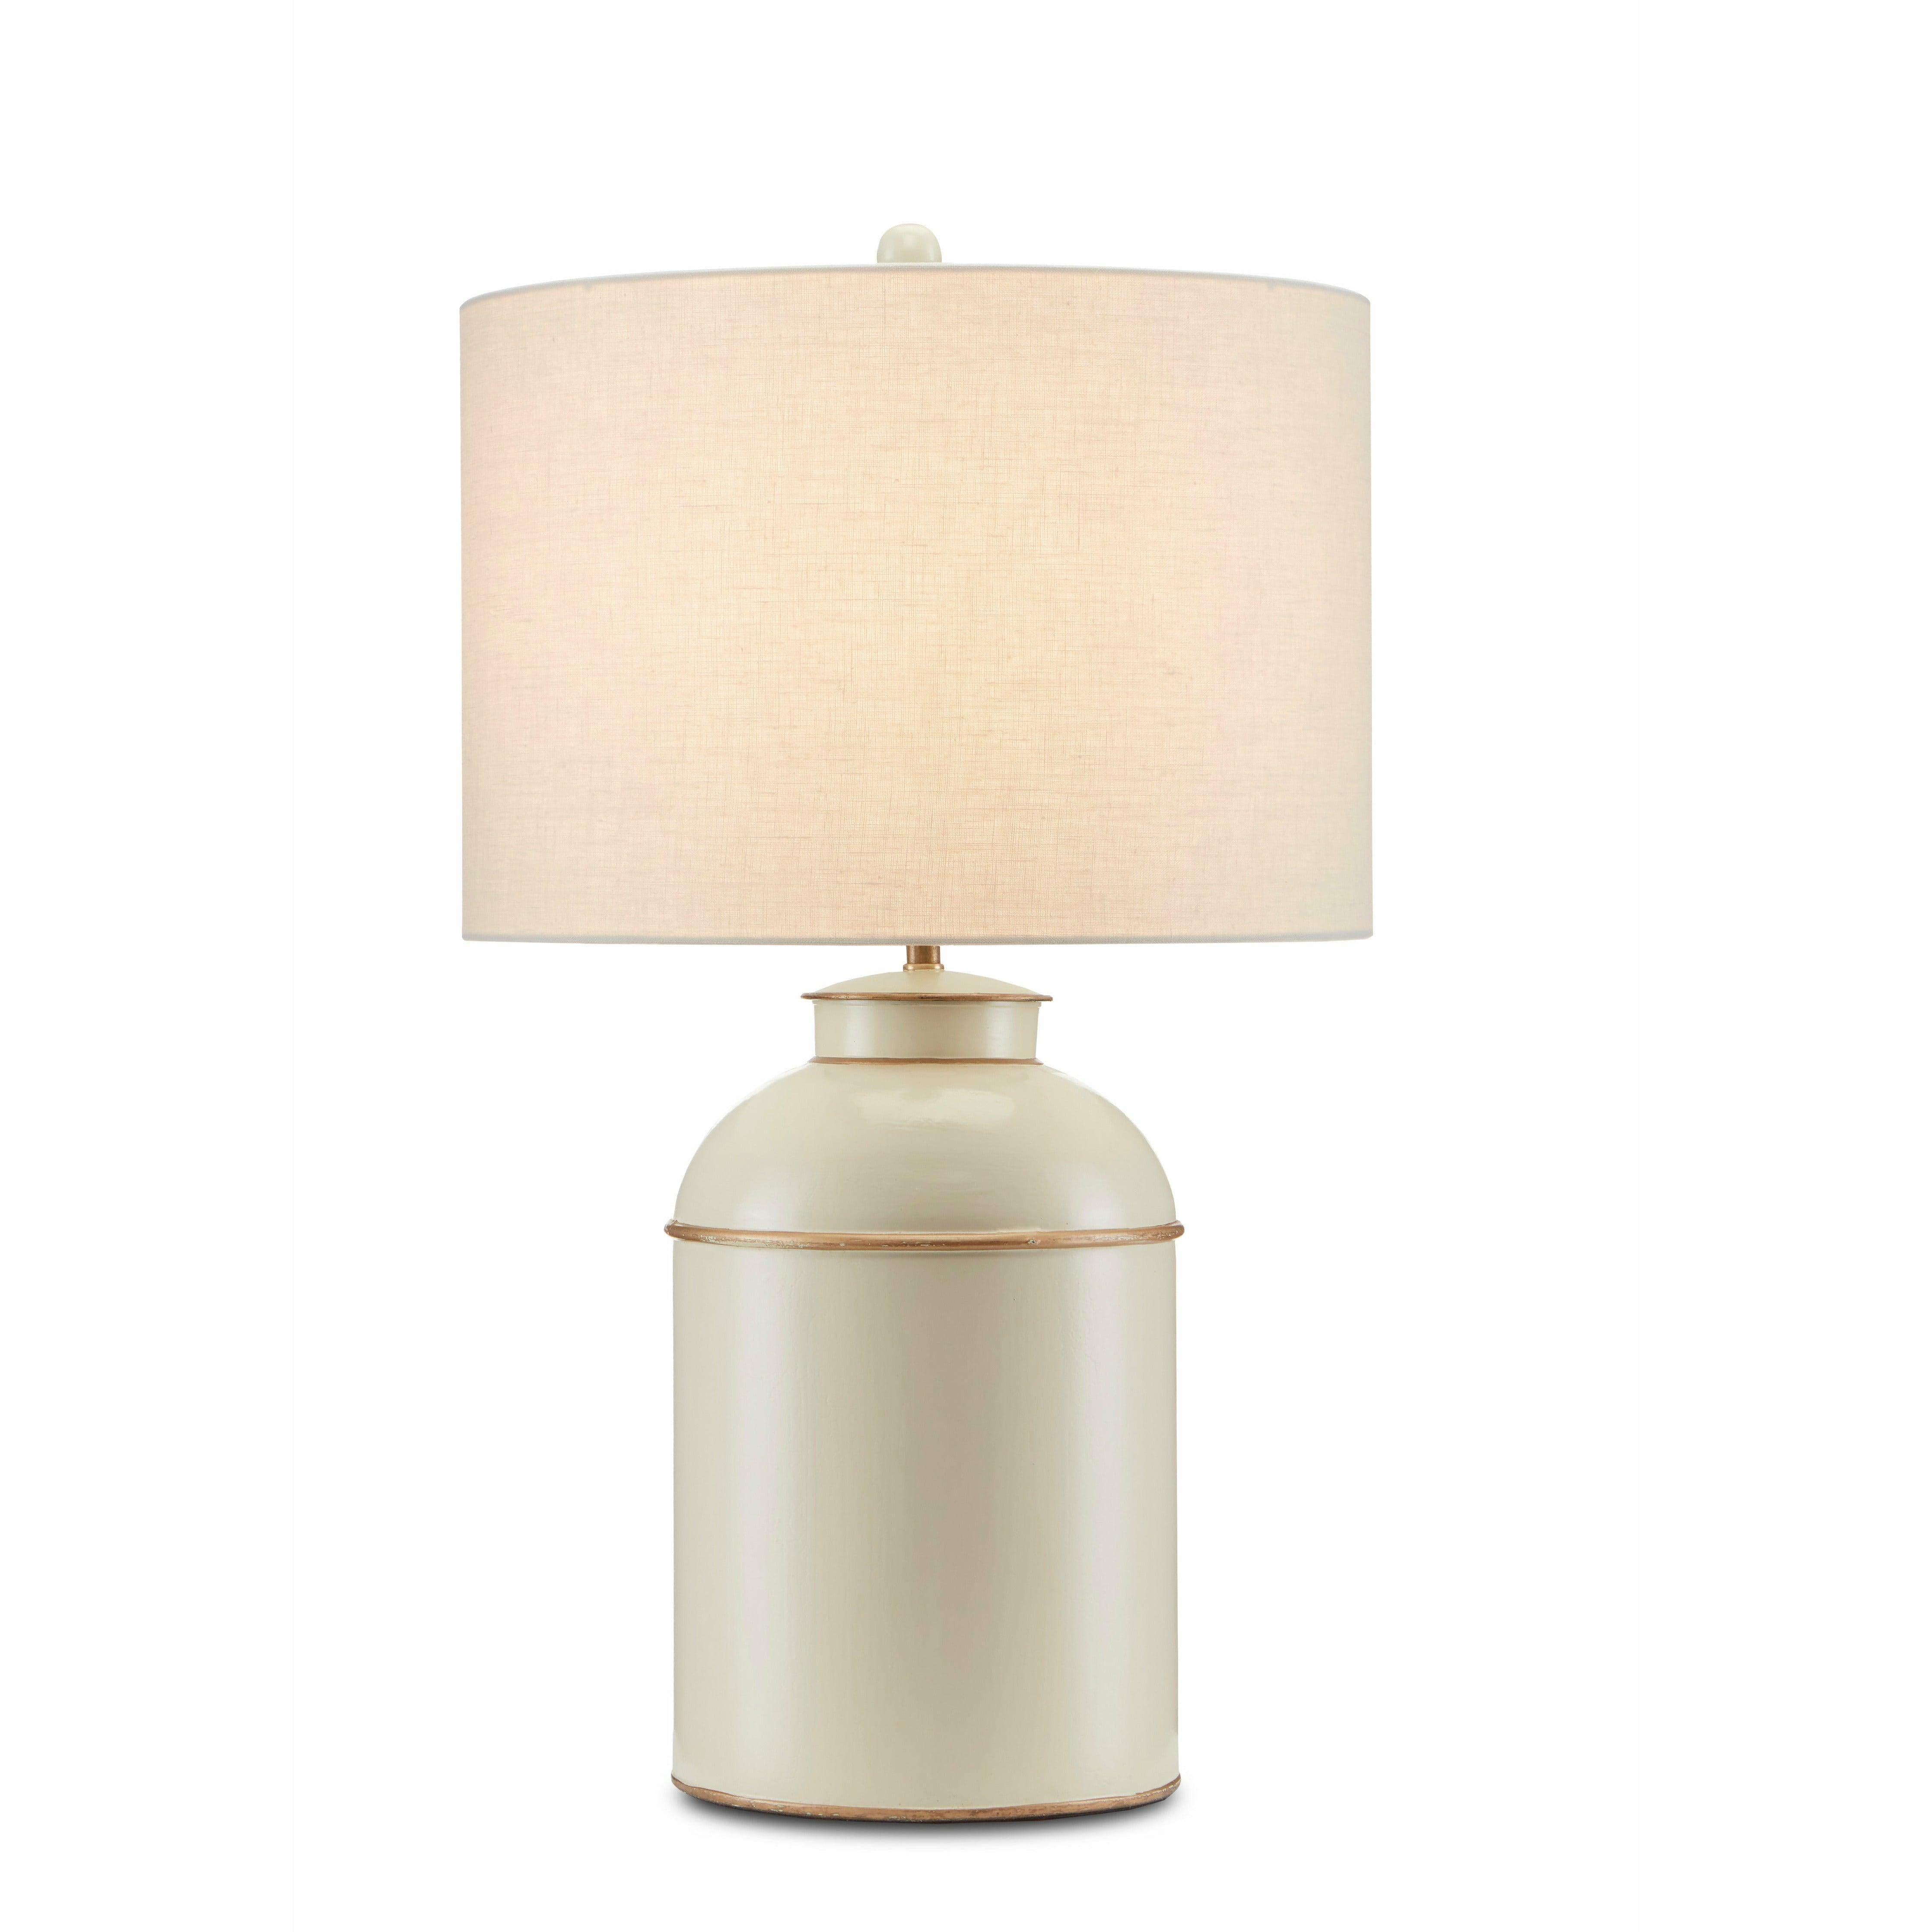 Currey and Company - London Table Lamp - 6000-0704 | Montreal Lighting & Hardware